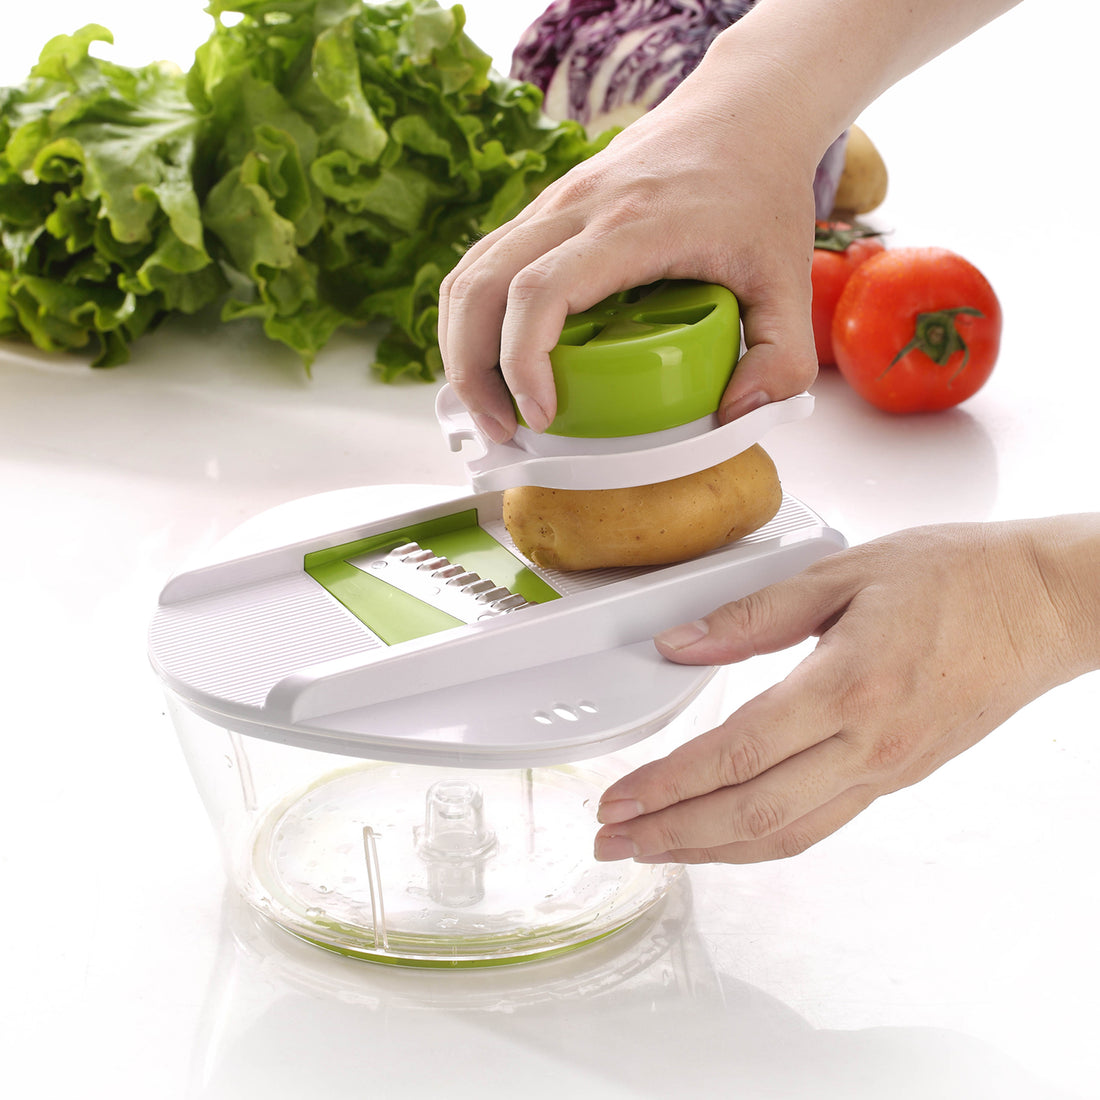 Hand Crank Food Processor with Stainless Steel Blades